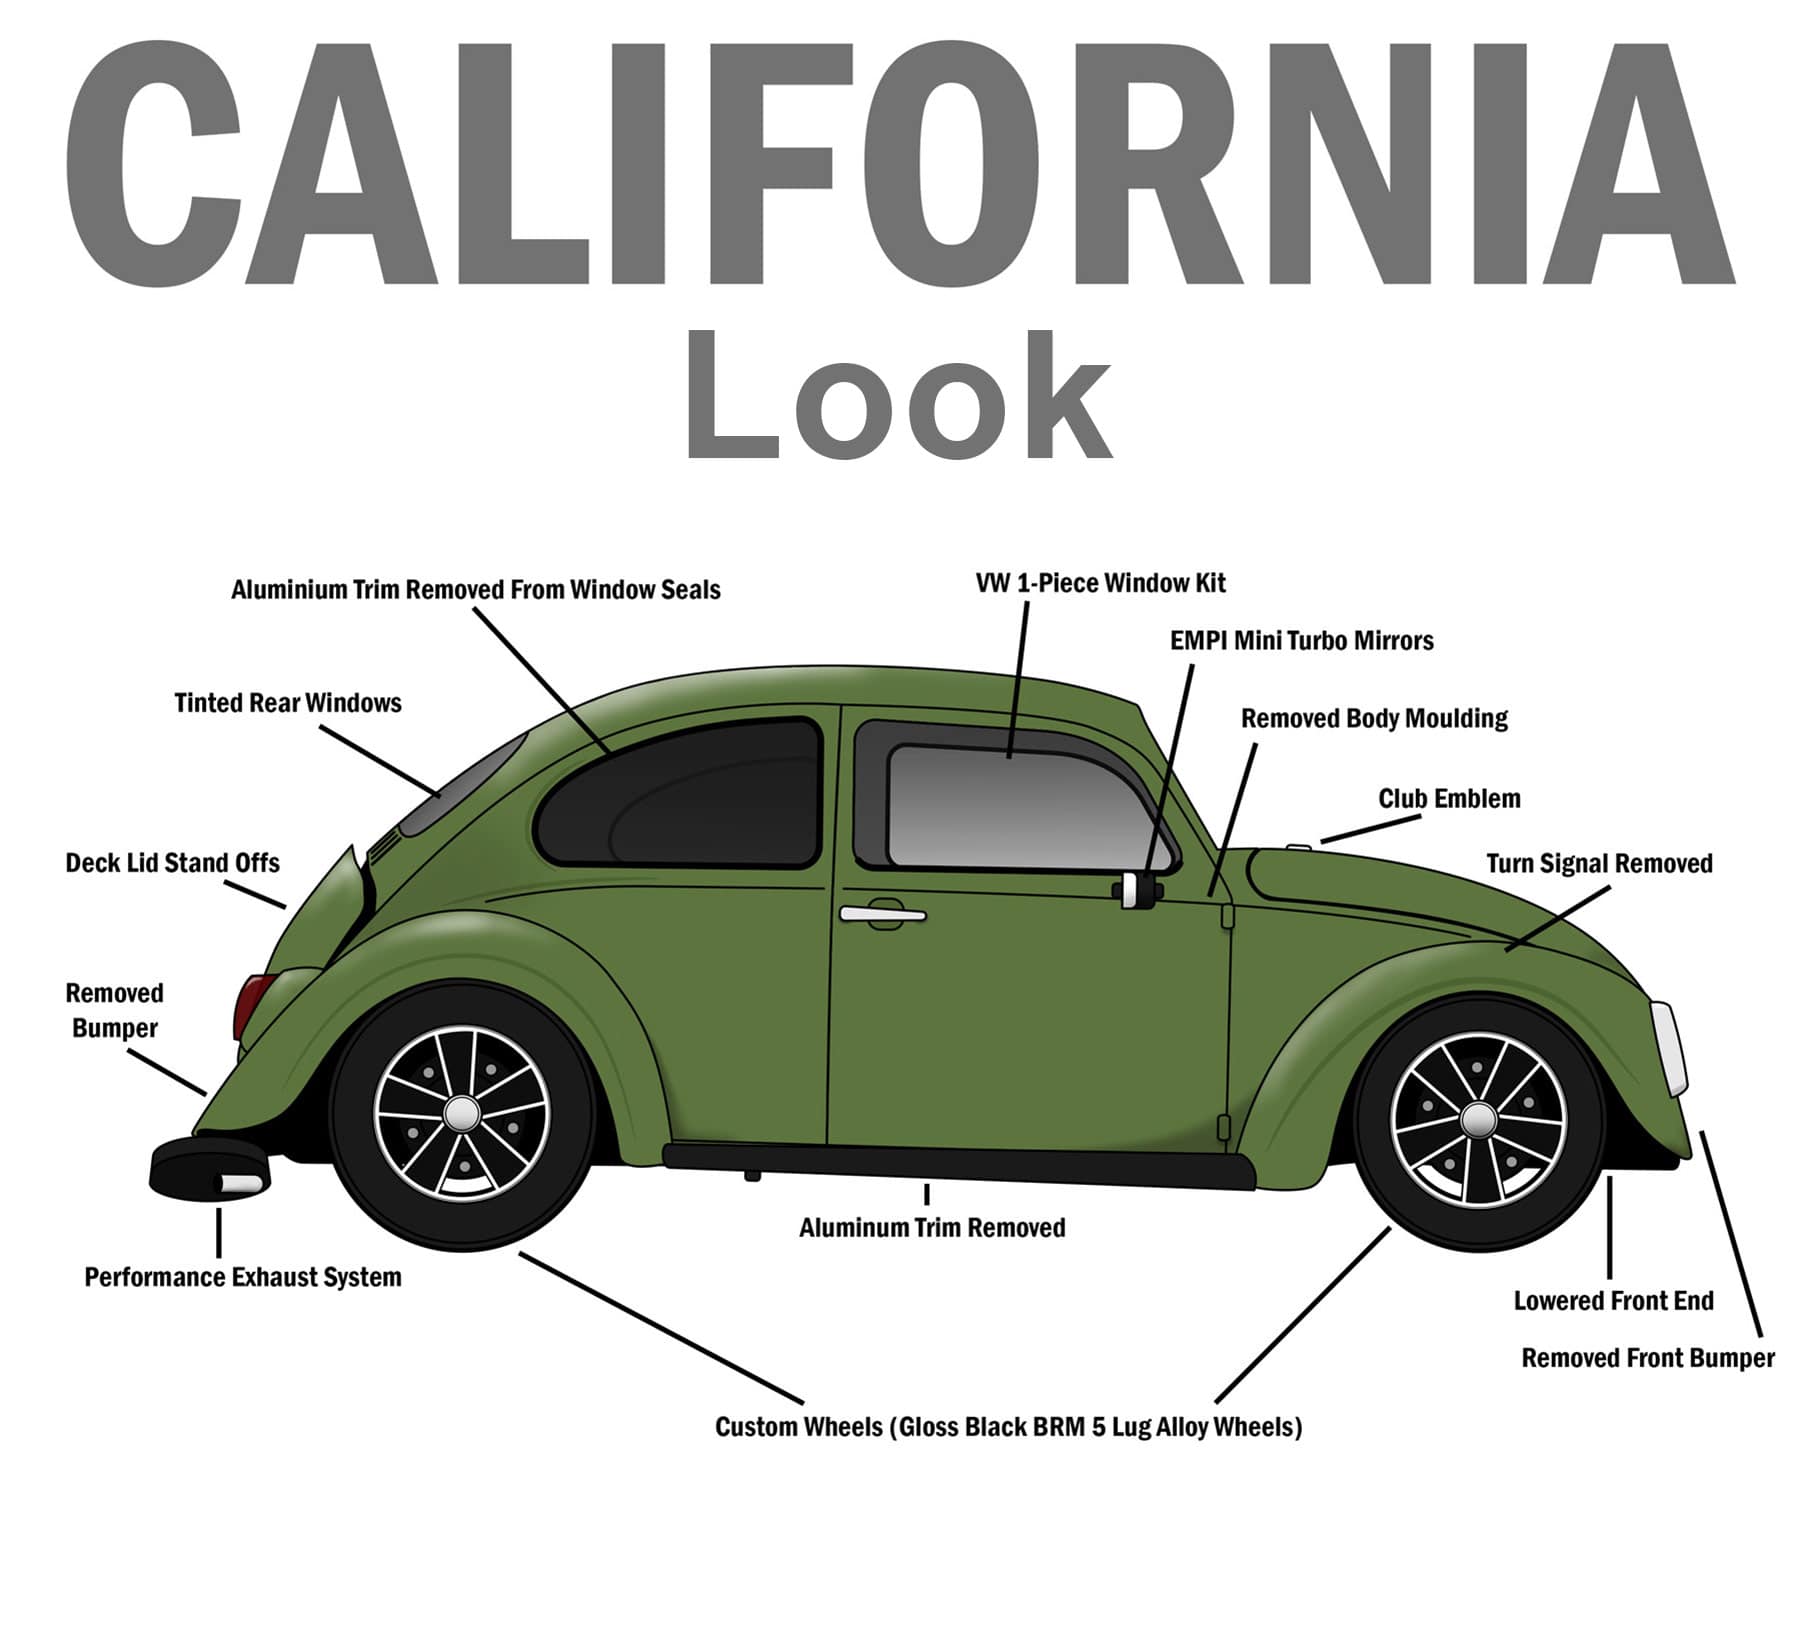 Air Cooled VW Logo - VW Parts | JBugs.com: Cal-Look vs American Style. Whats the difference?